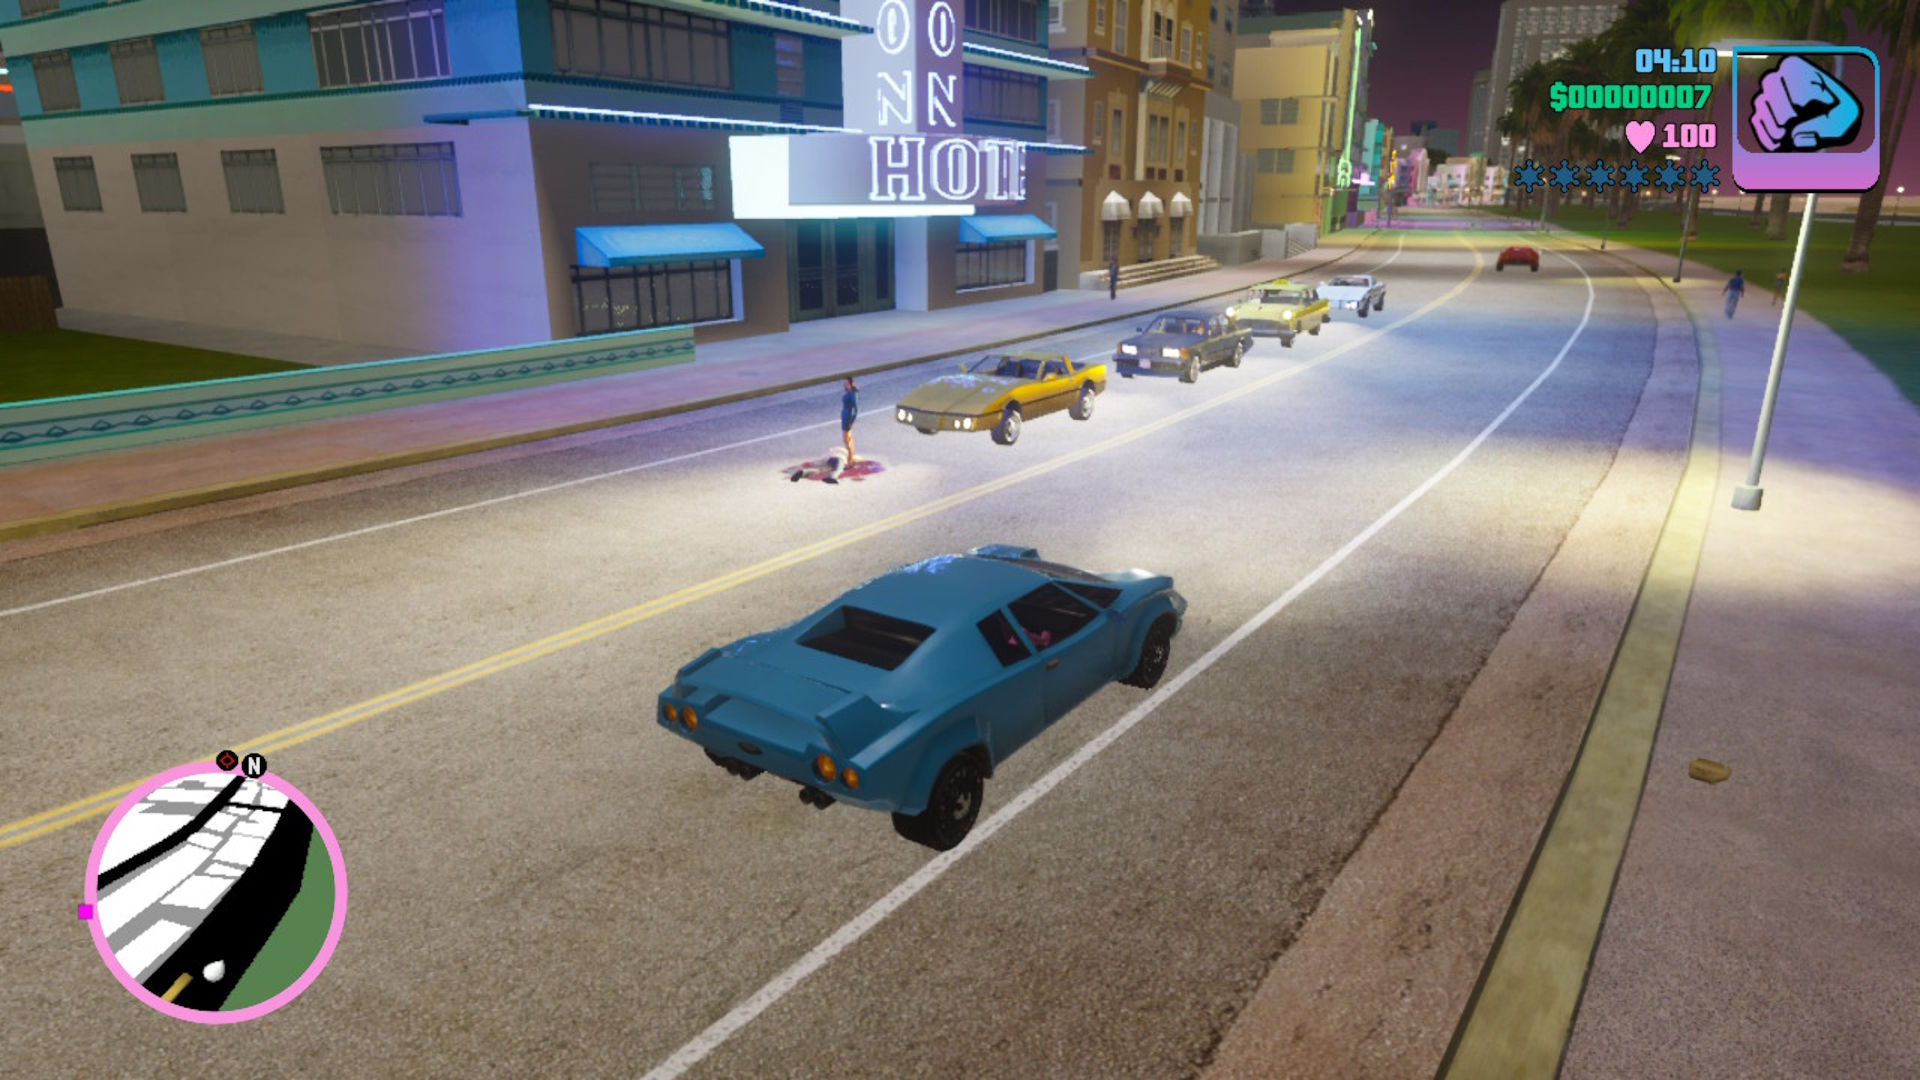 Review: Grand Theft Auto: The Trilogy - The Definitive Edition